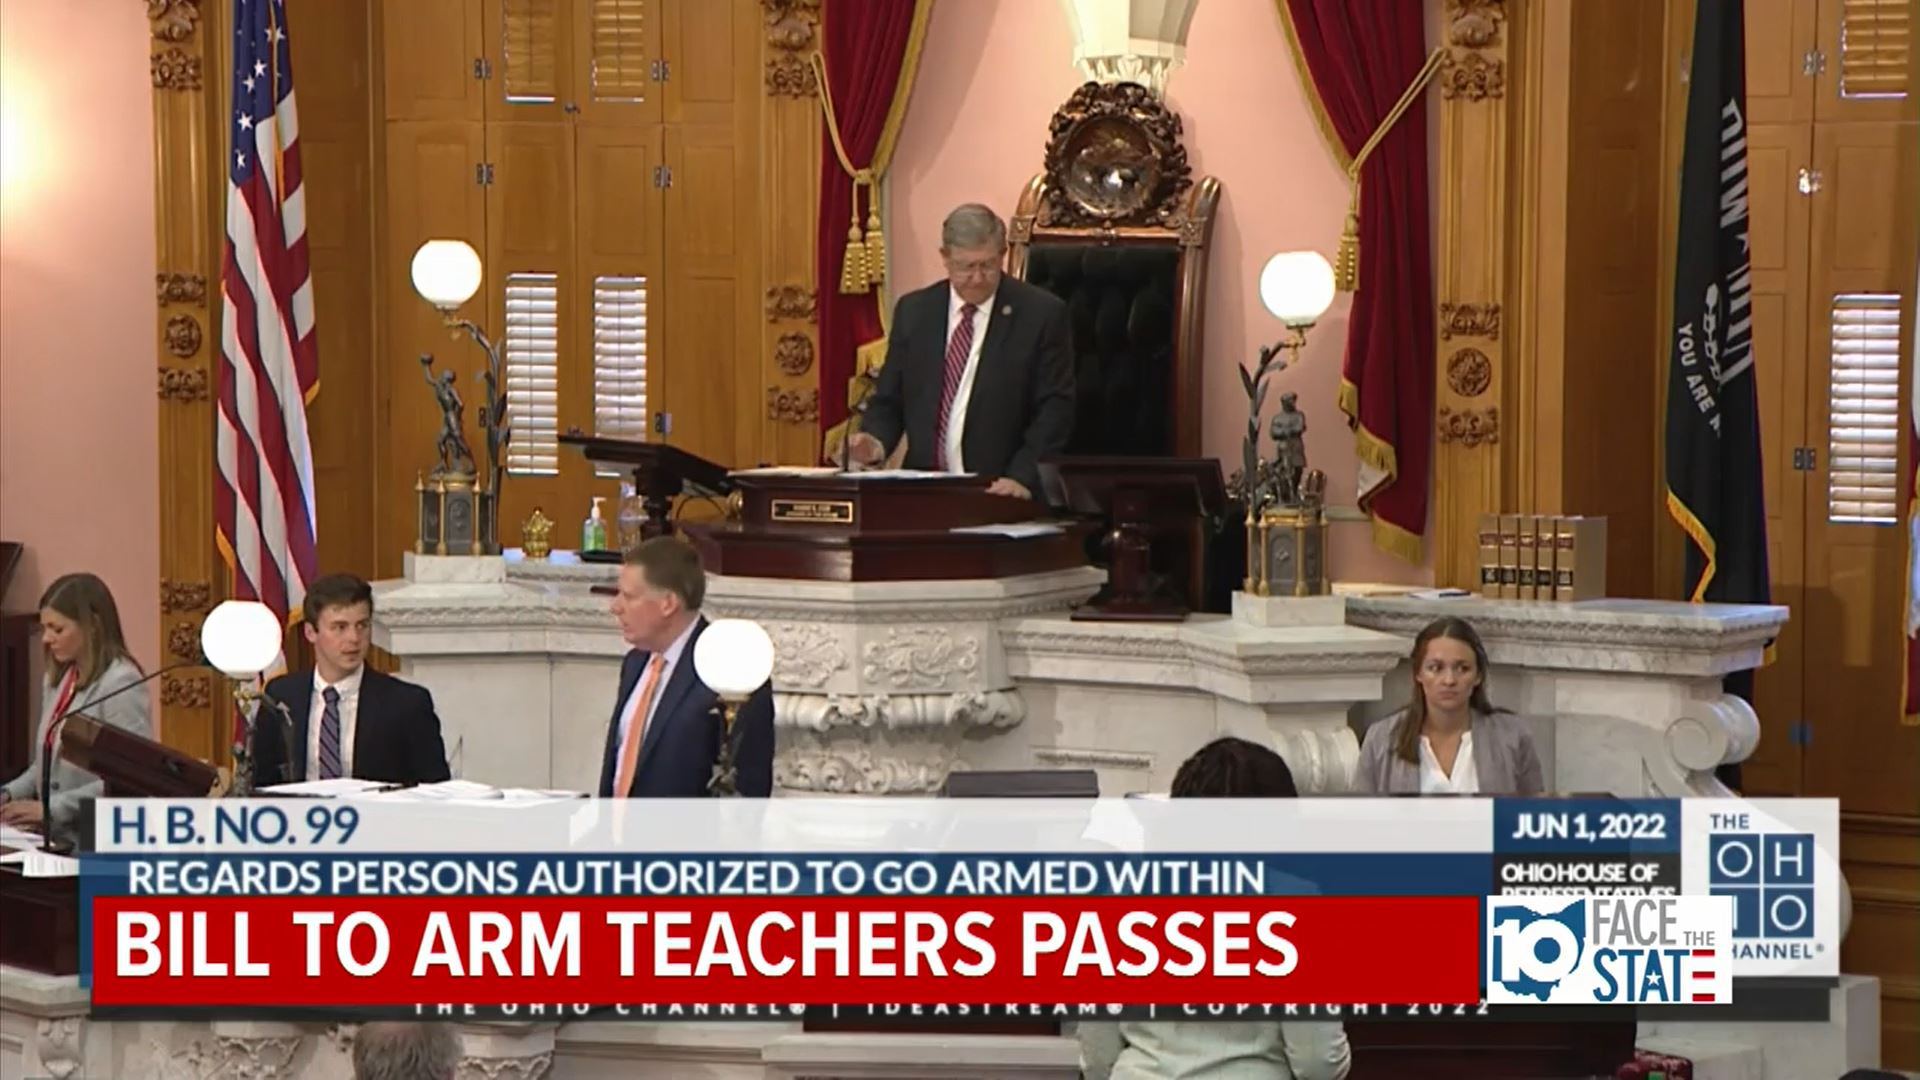 This week's Face the State takes a look at the Ohio Legislature passing House Bill 99, which allows teachers and other school staff to be armed.